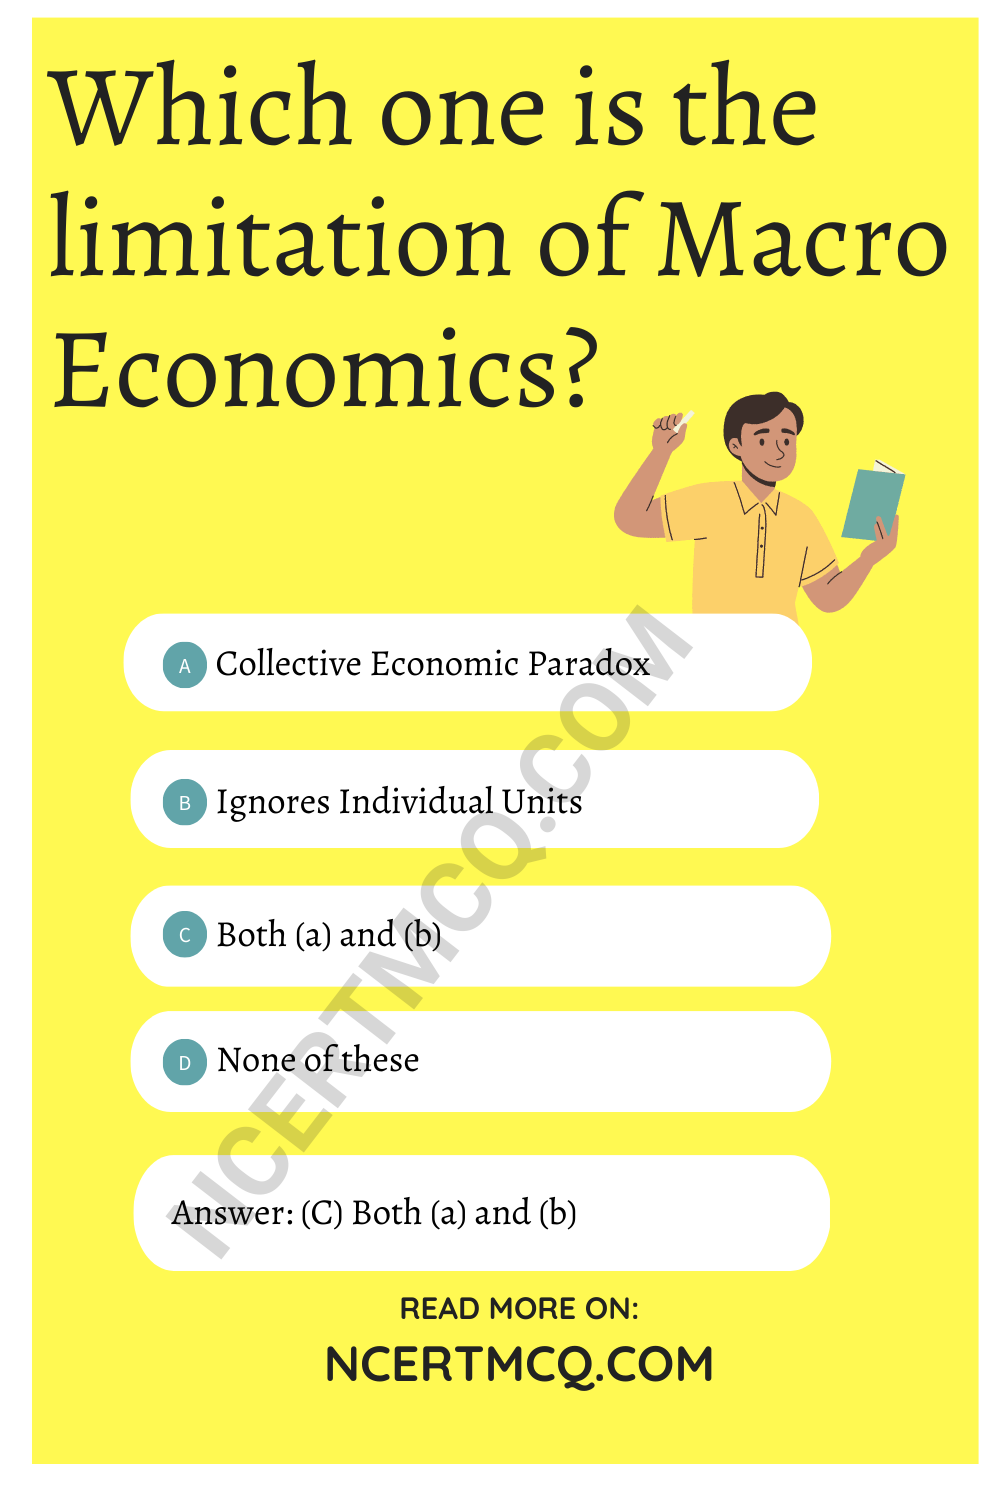 Which one is the limitation of Macro Economics?